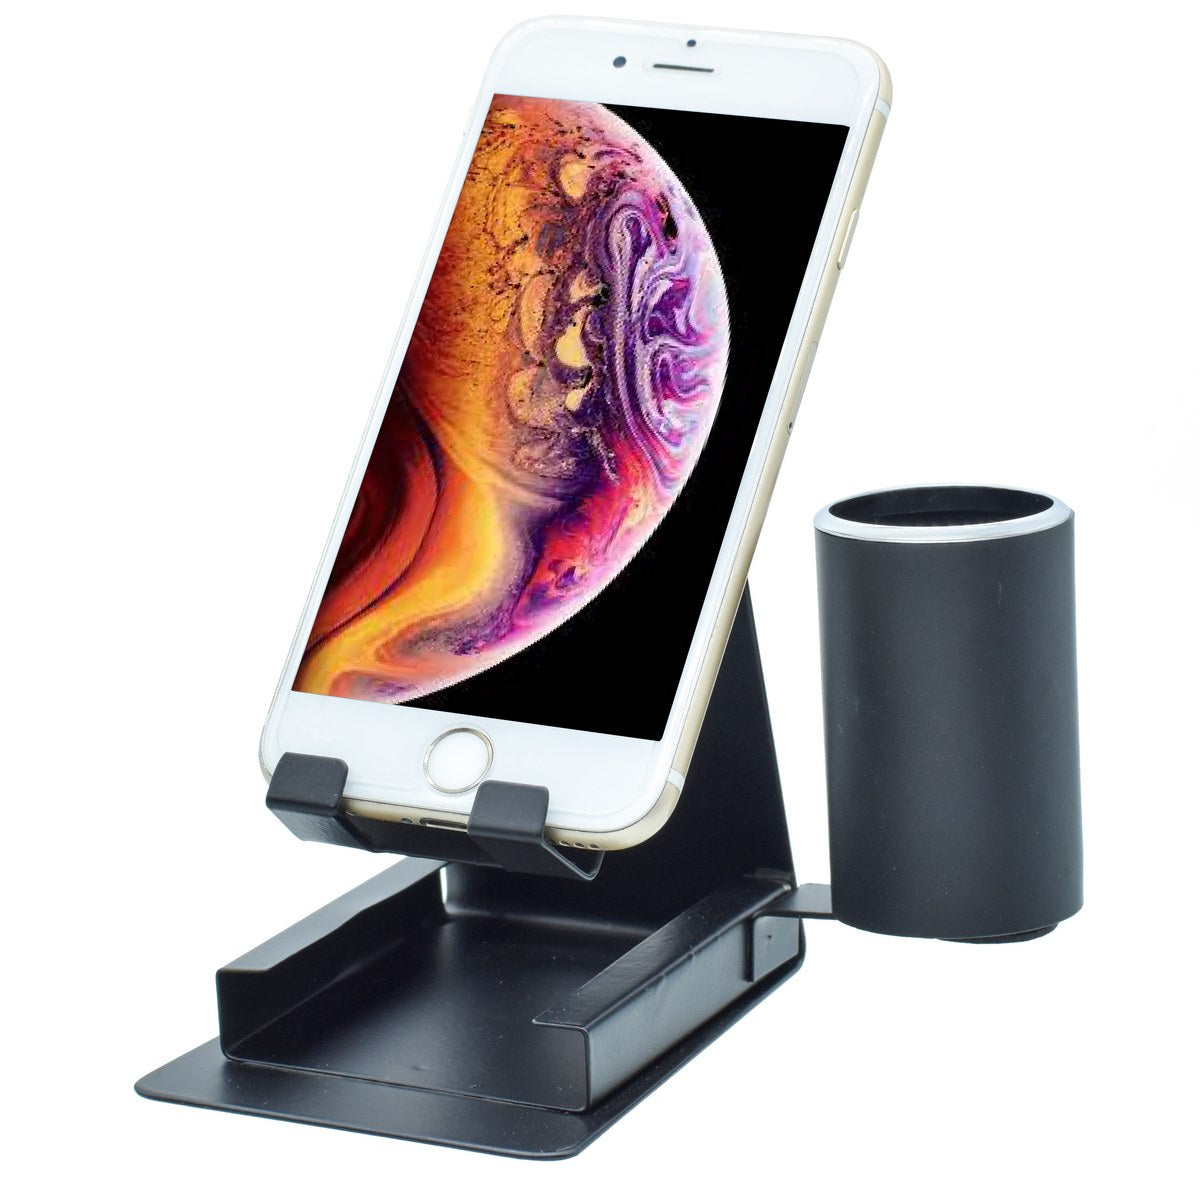 jags-mumbai Pen Stands Mobile Holder With CH And Pen Stand